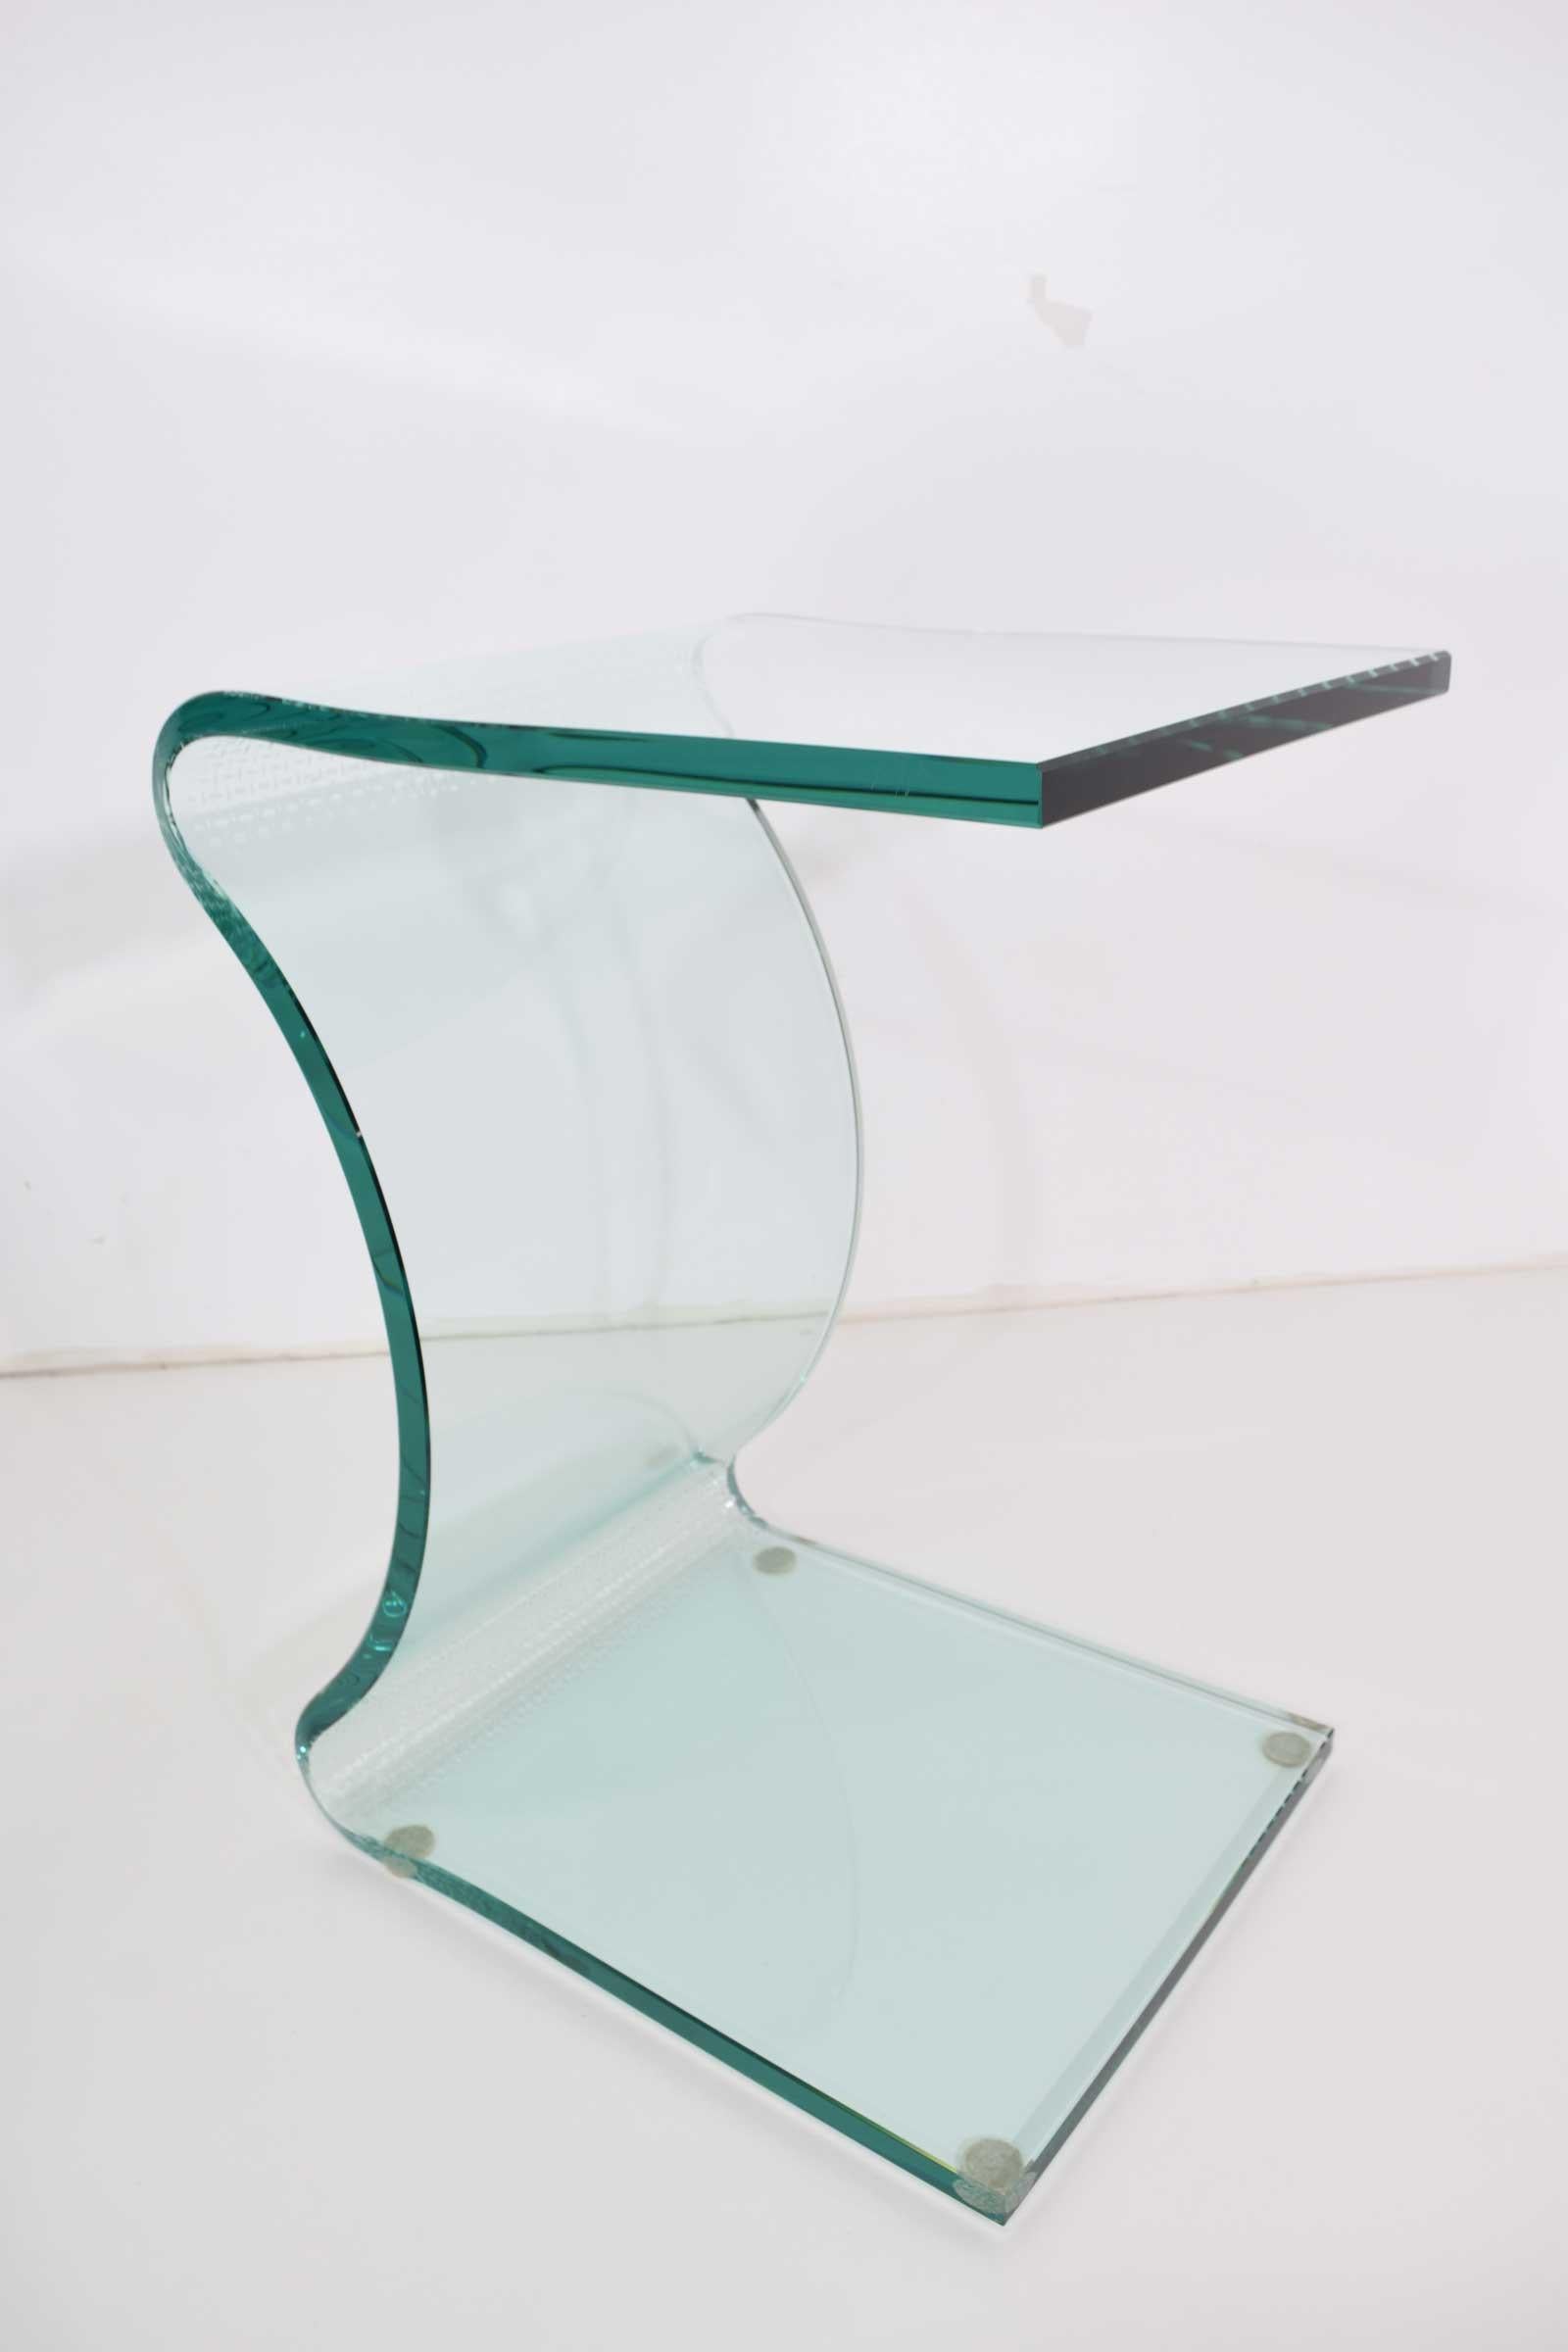 L. Fife Signed Glass Side Table 1